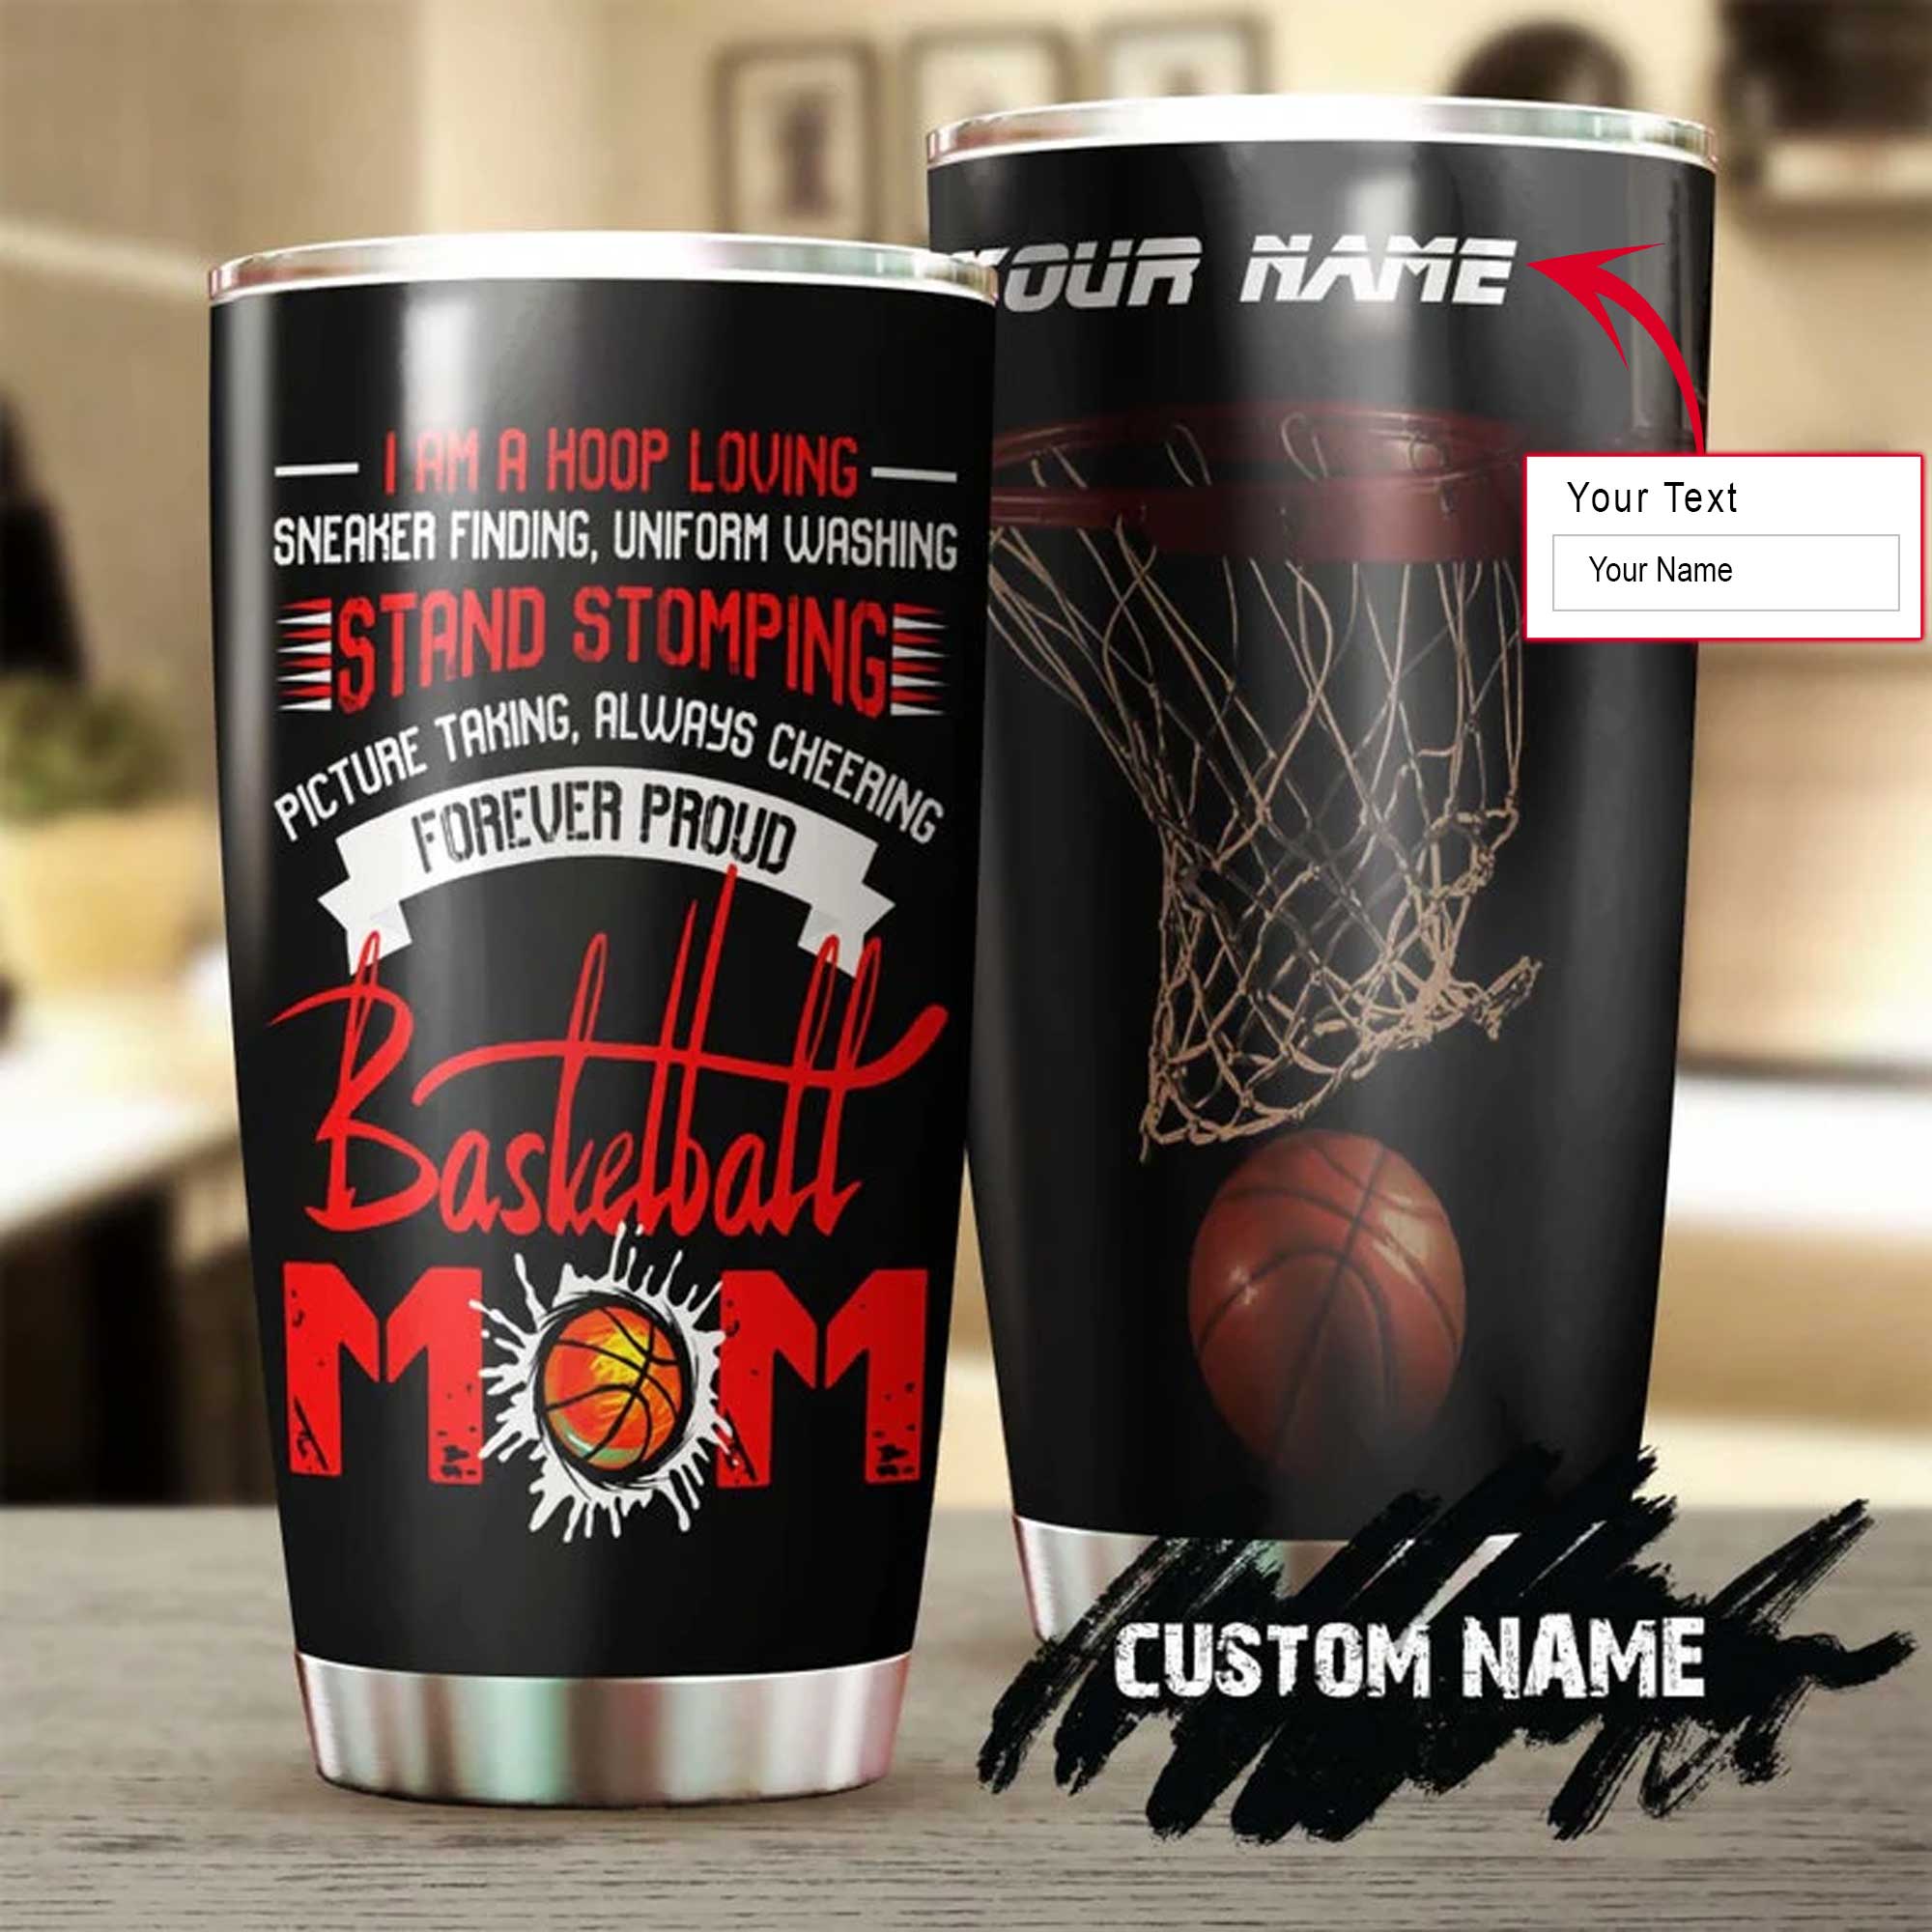 Personalized Mother's Day Gift Tumbler - Custom Gift For Mother's Day, Presents for Mom - Forever Proud Basketball Mom Tumbler